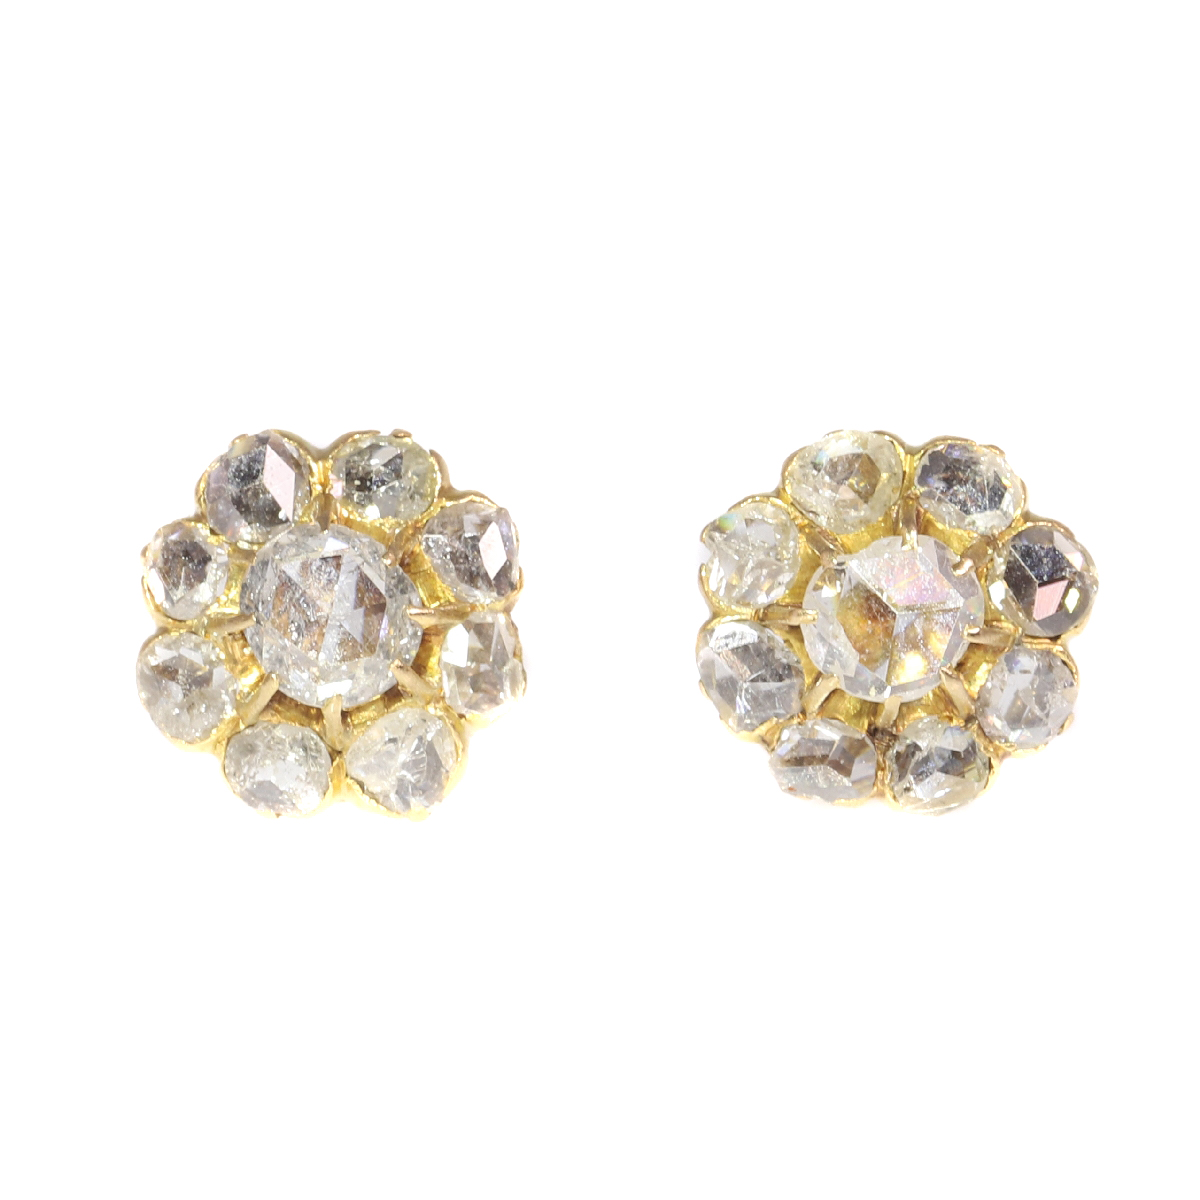 Antique Victorian 18K gold earstuds with 18 rose cut diamonds